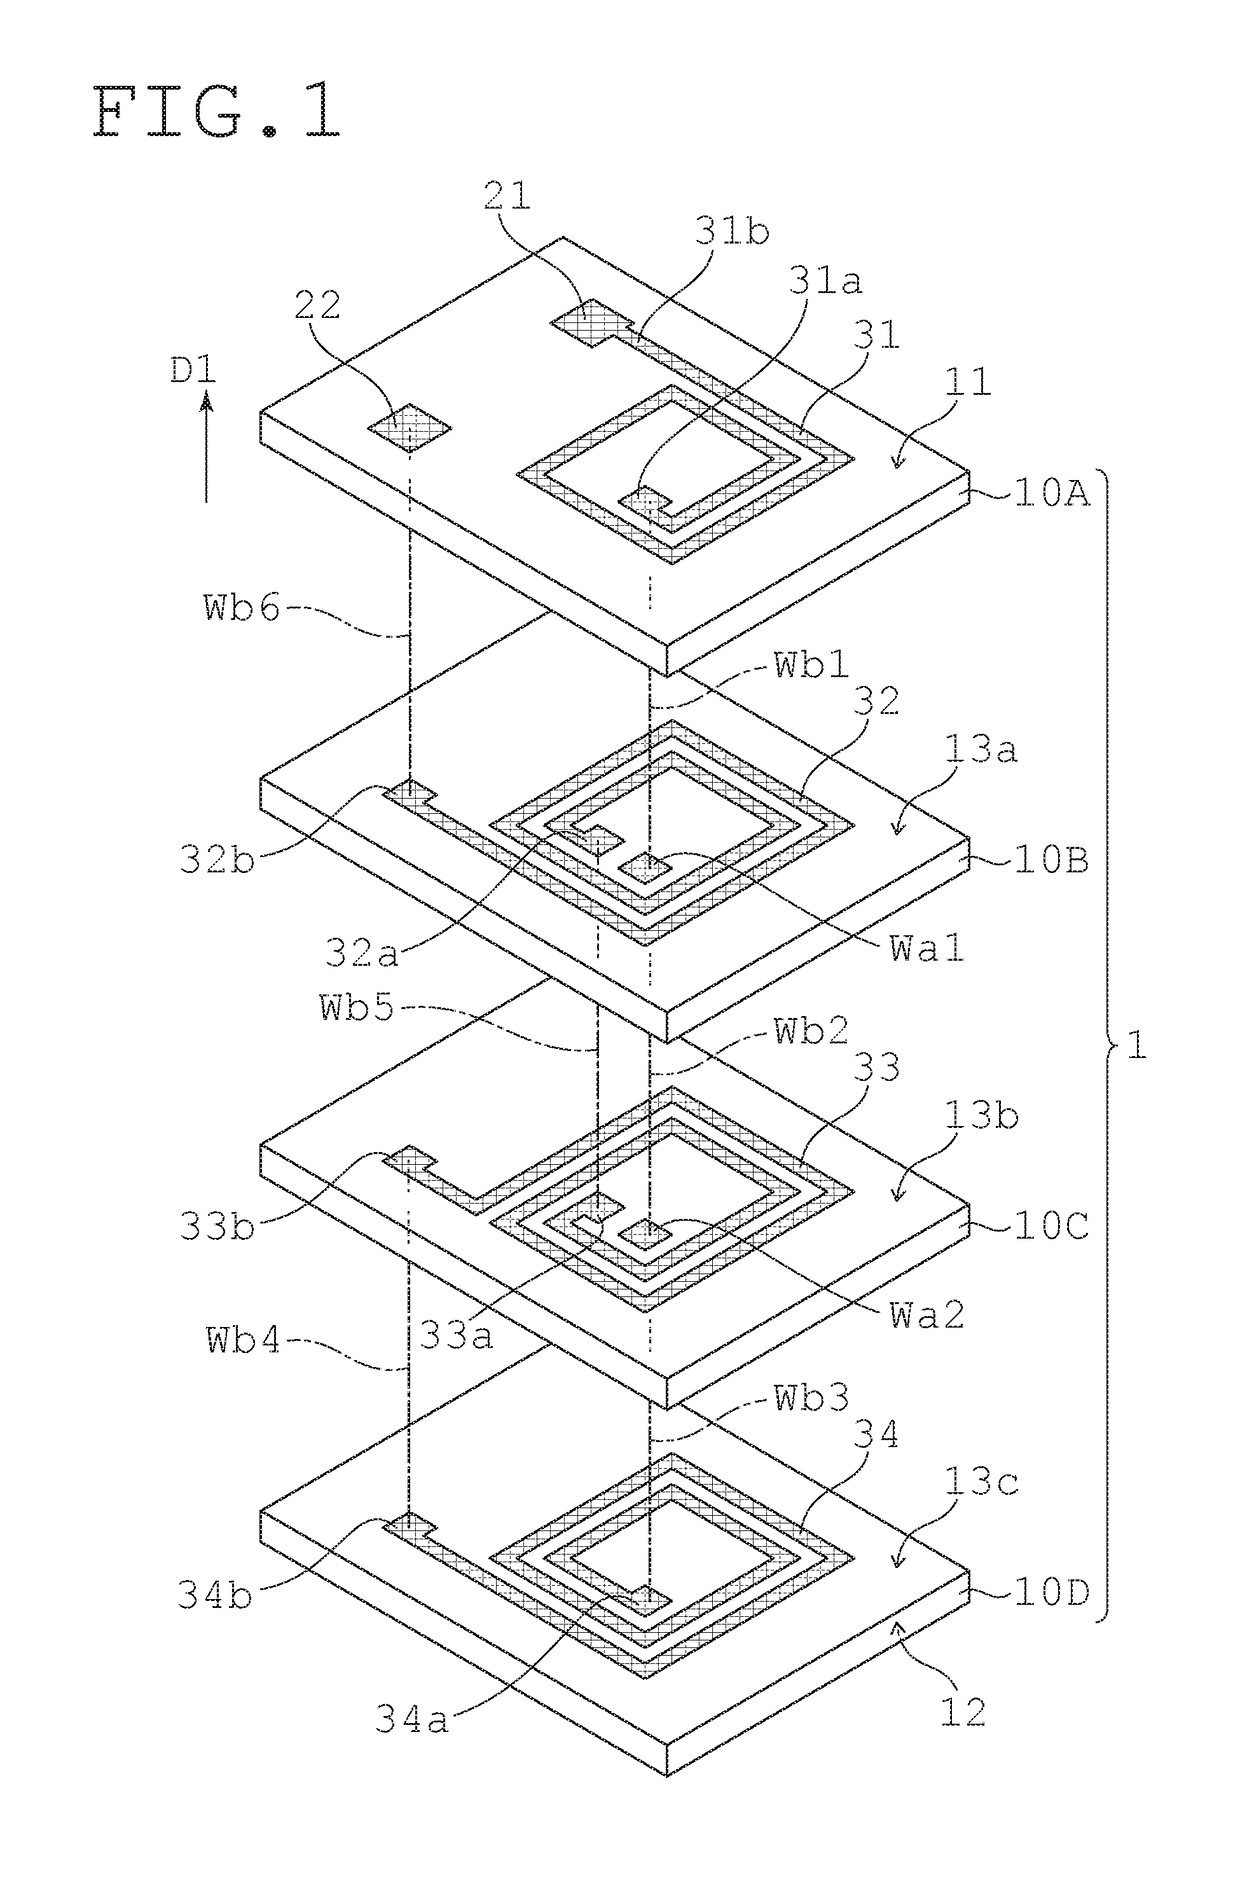 Multilayer substrate and method for manufacturing the same